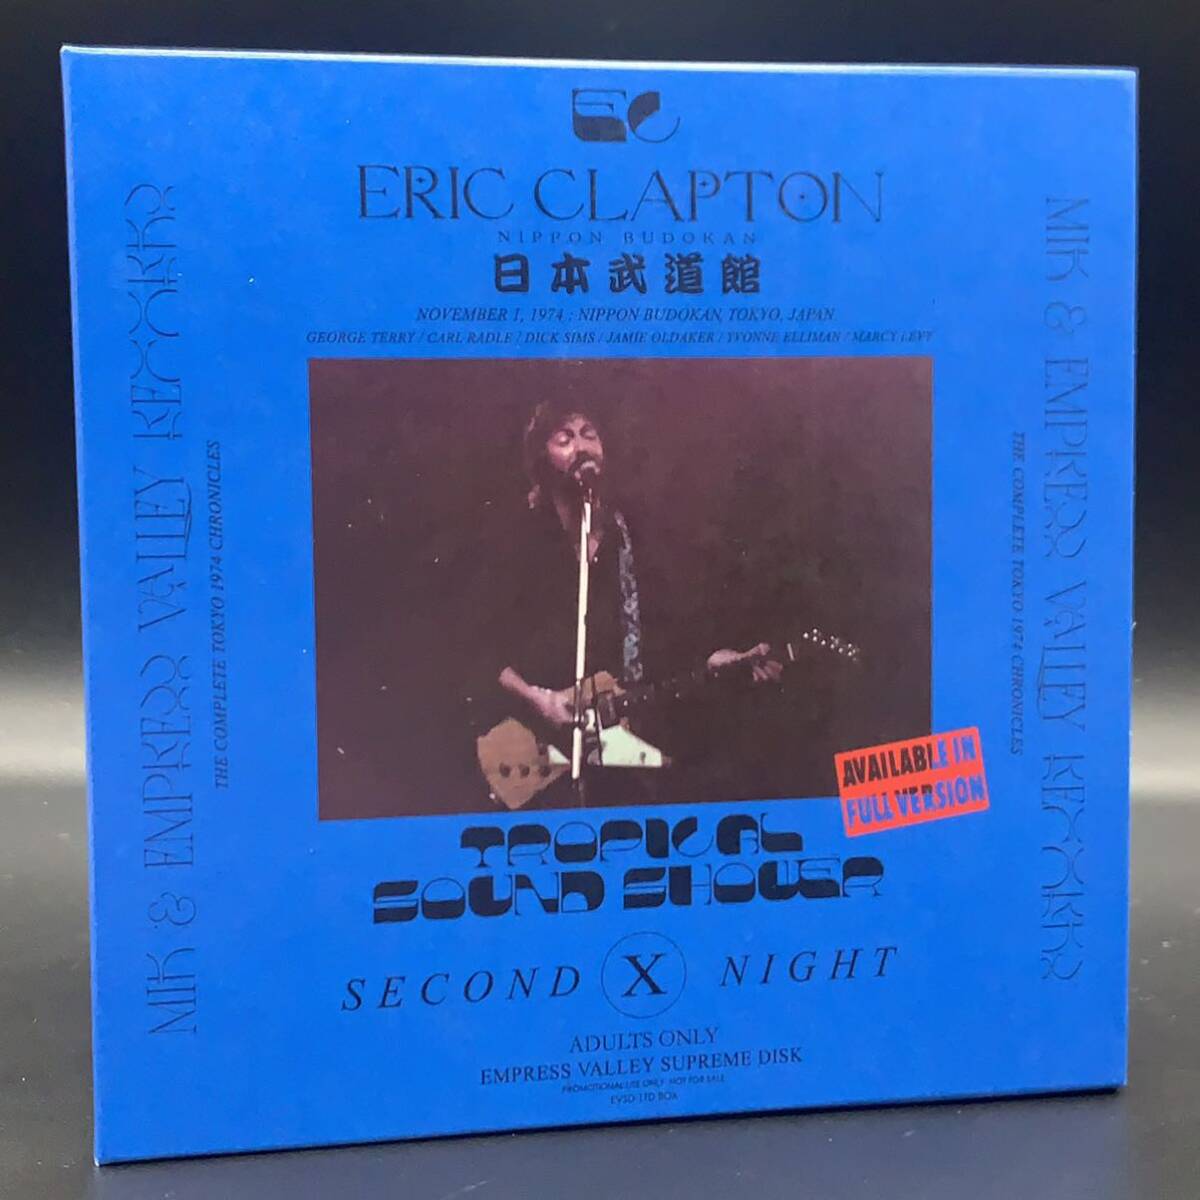 ERIC CLAPTON / TROPICAL SOUND SHOWER「亜熱帯武道館」(6CD BOX with Booklet) 初来日武道館3公演を全て初登場音源で収録した凄いやつ！の画像5